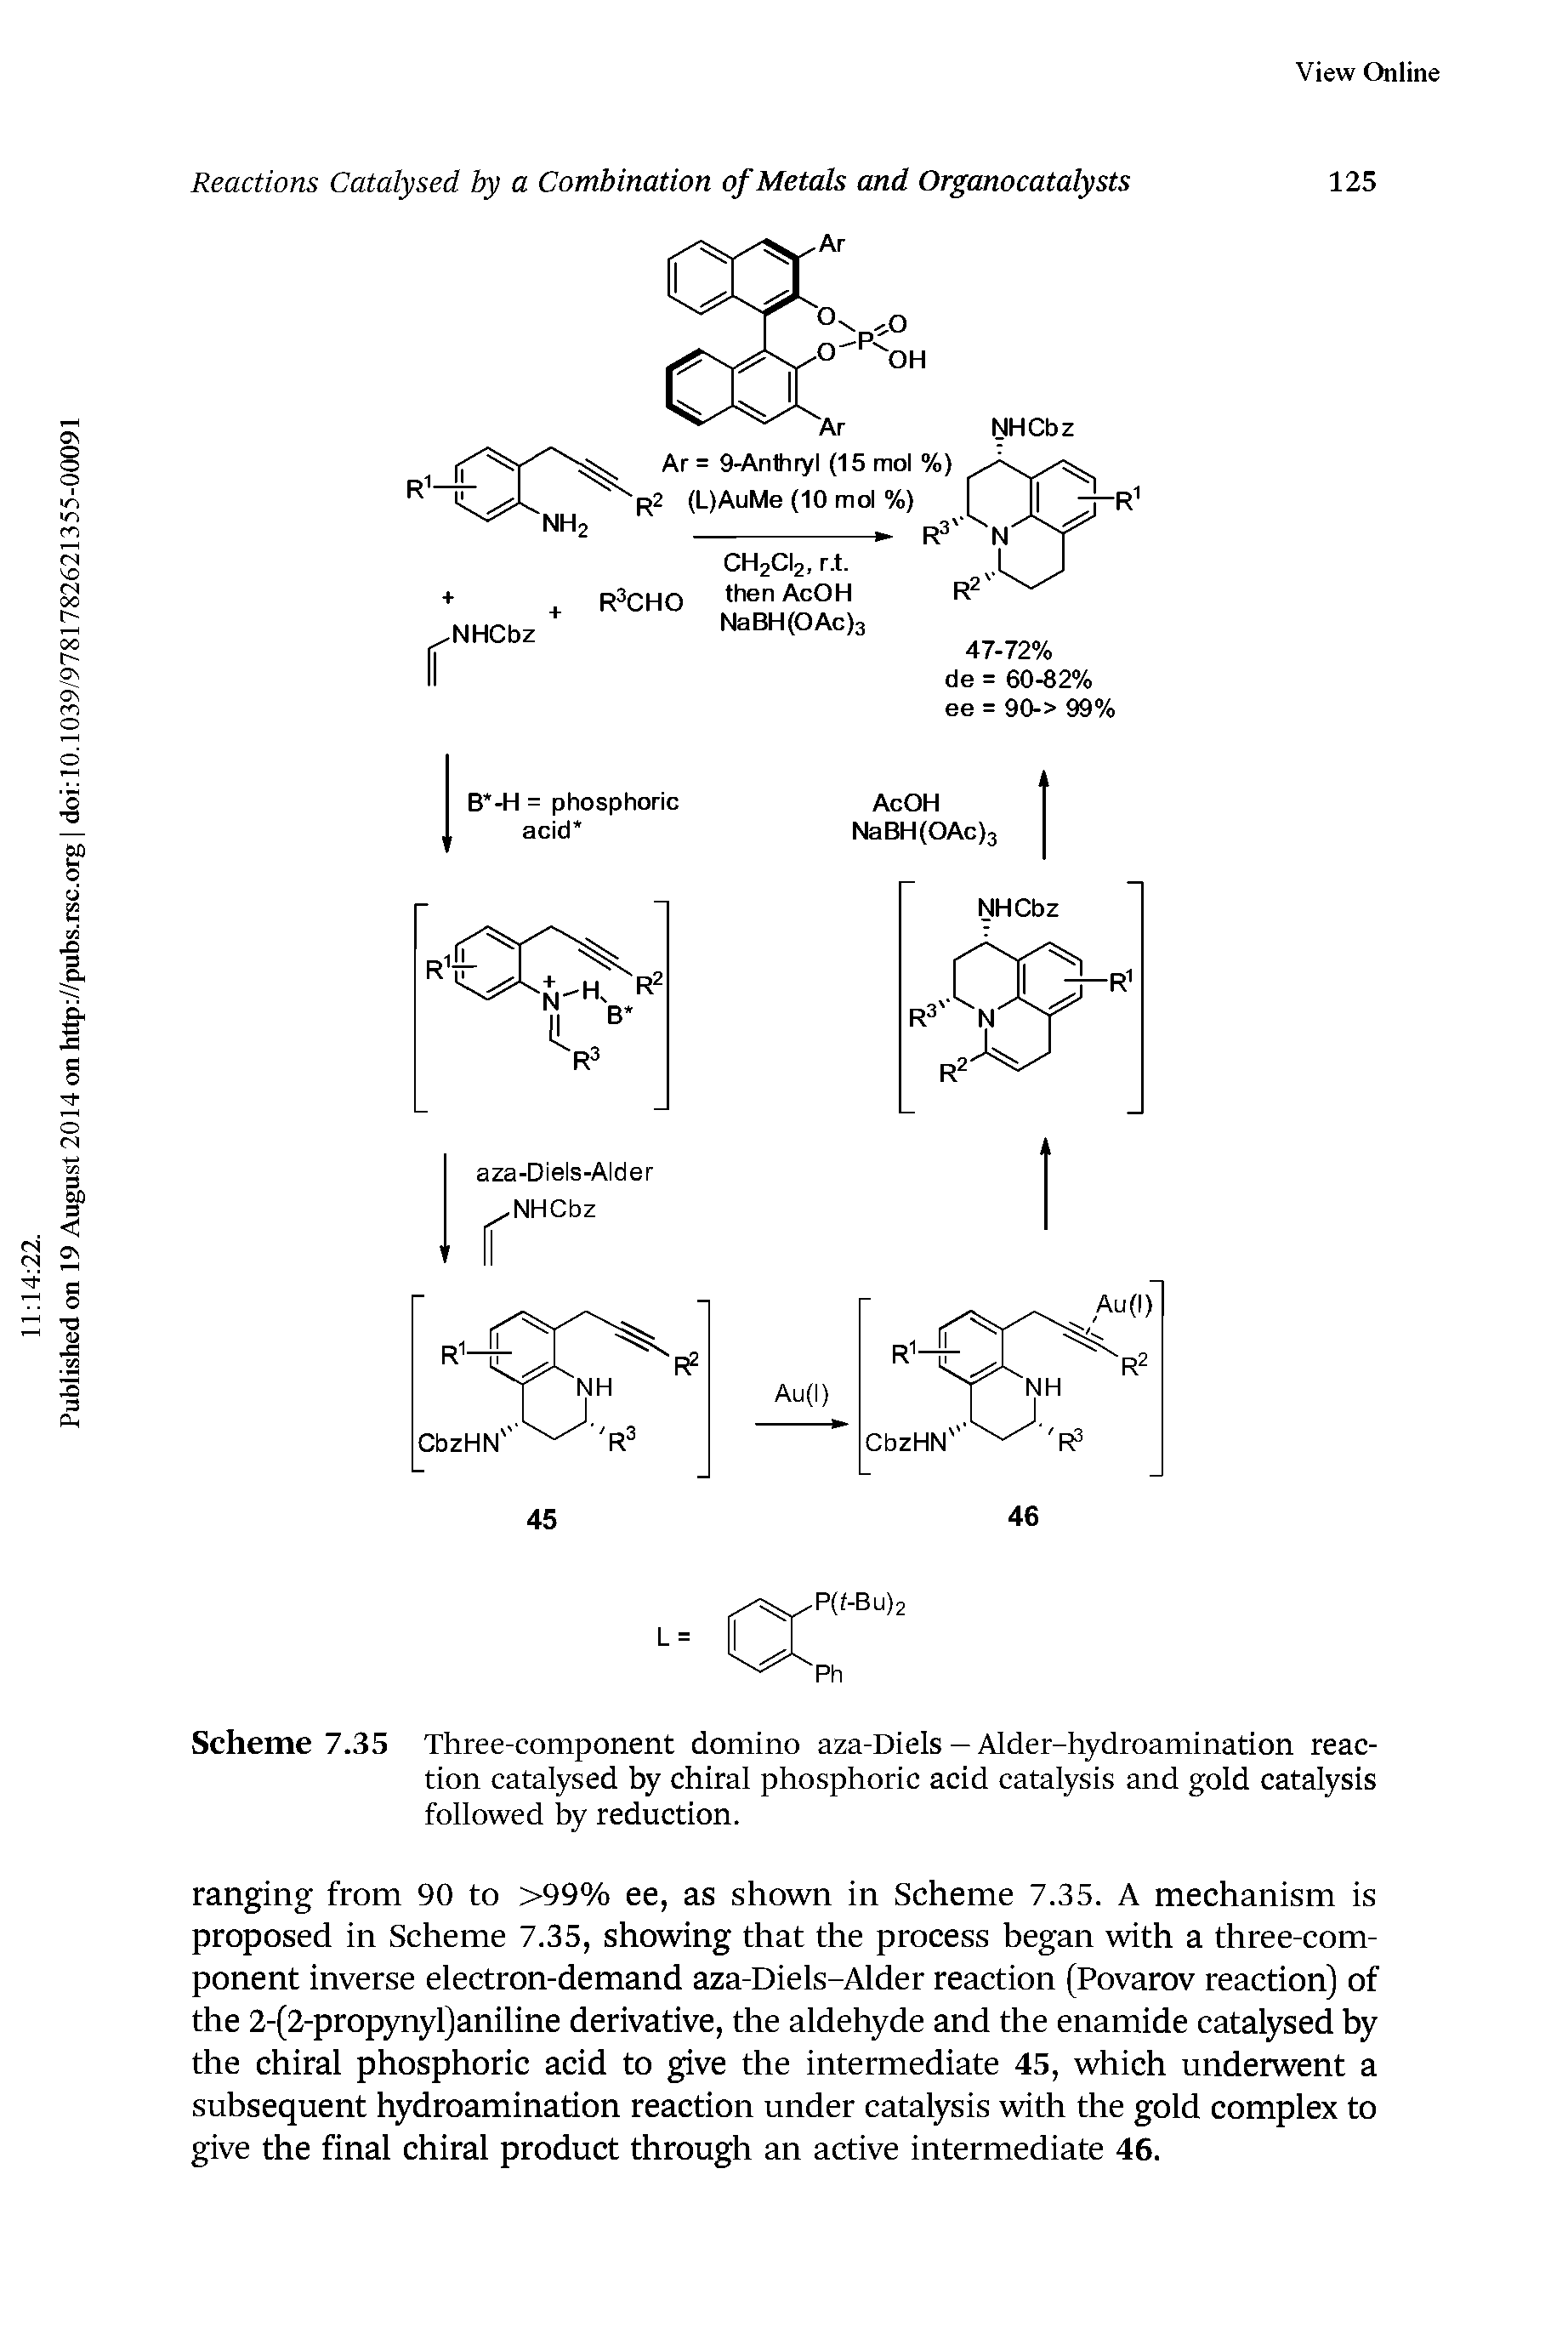 Scheme 7.35 Three-component domino aza-Diels — Alder-hydroamination reaction catalysed by chiral phosphoric acid catalysis and gold catalysis followed by reduction.